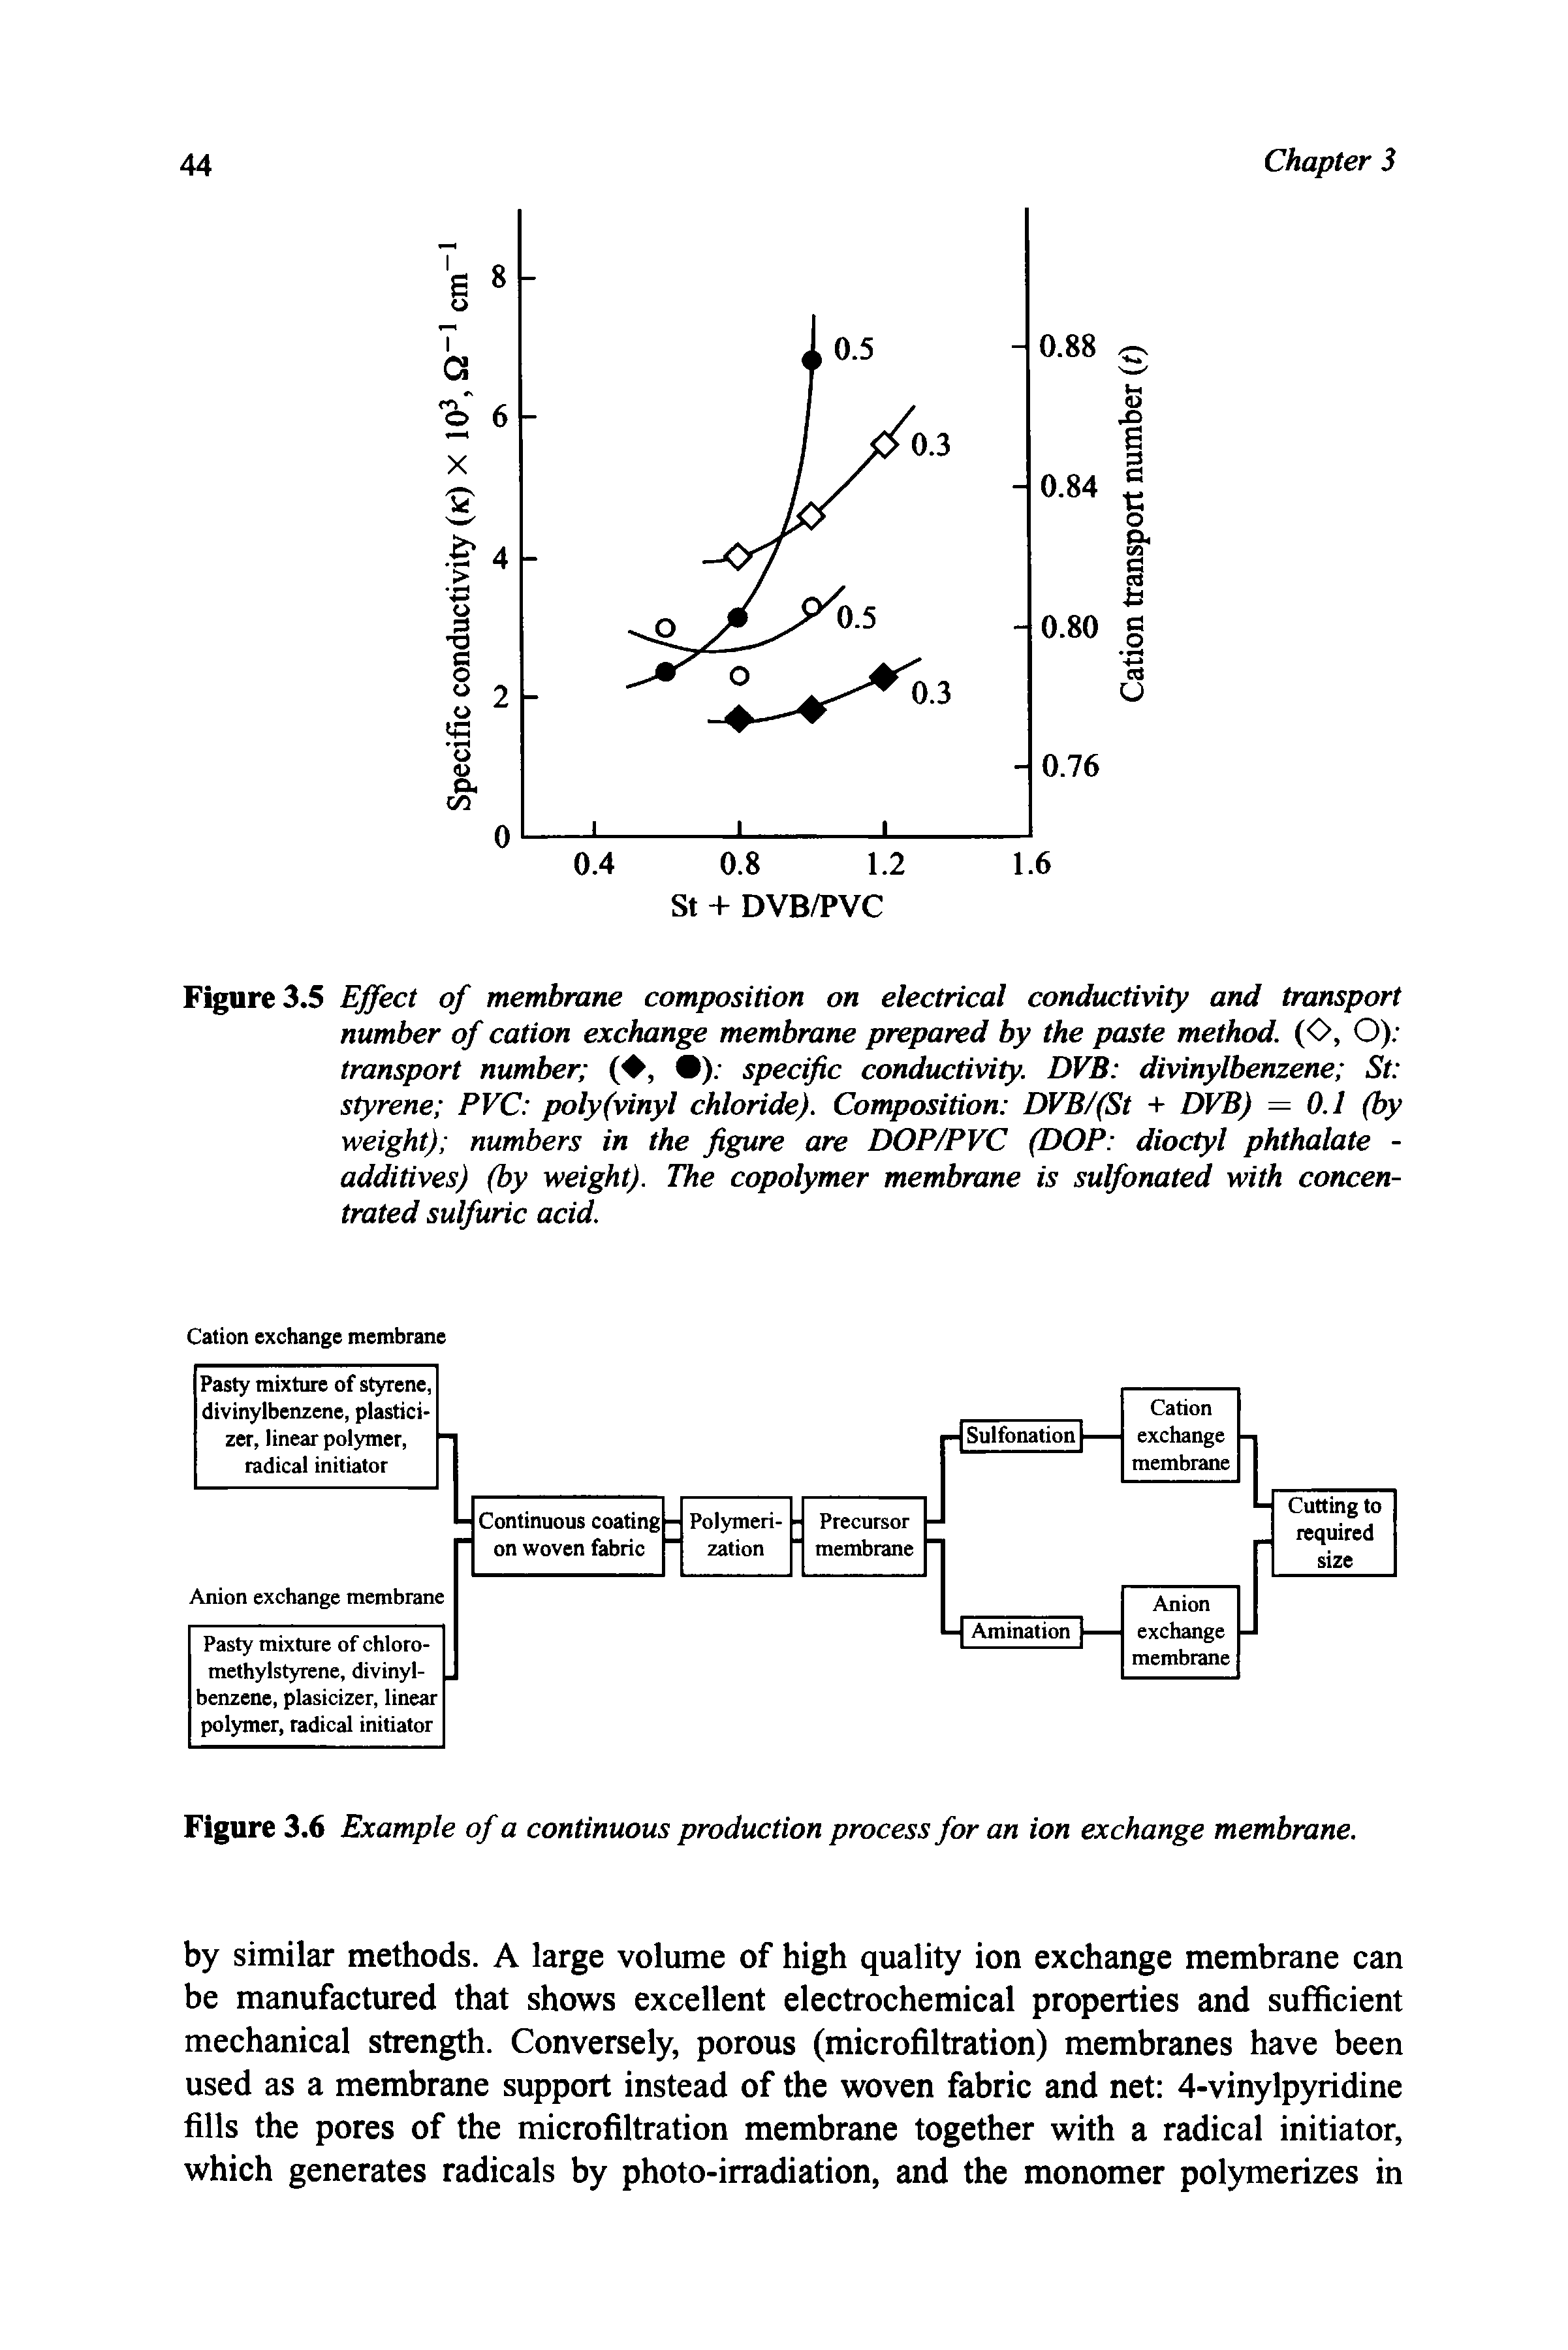 Figure 3.5 Effect of membrane composition on electrical conductivity and transport number of cation exchange membrane prepared by the paste method. (O, O) transport number ( , ) specific conductivity. DVB divinylbenzene St styrene PVC poly(vinyl chloride). Composition DVB/(St + DVB) — 0.1 (by weight) numbers in the figure are DOP/PVC (DOP dioctyl phthalate -additives) (by weight). The copolymer membrane is sulfonated with concentrated sulfuric acid.